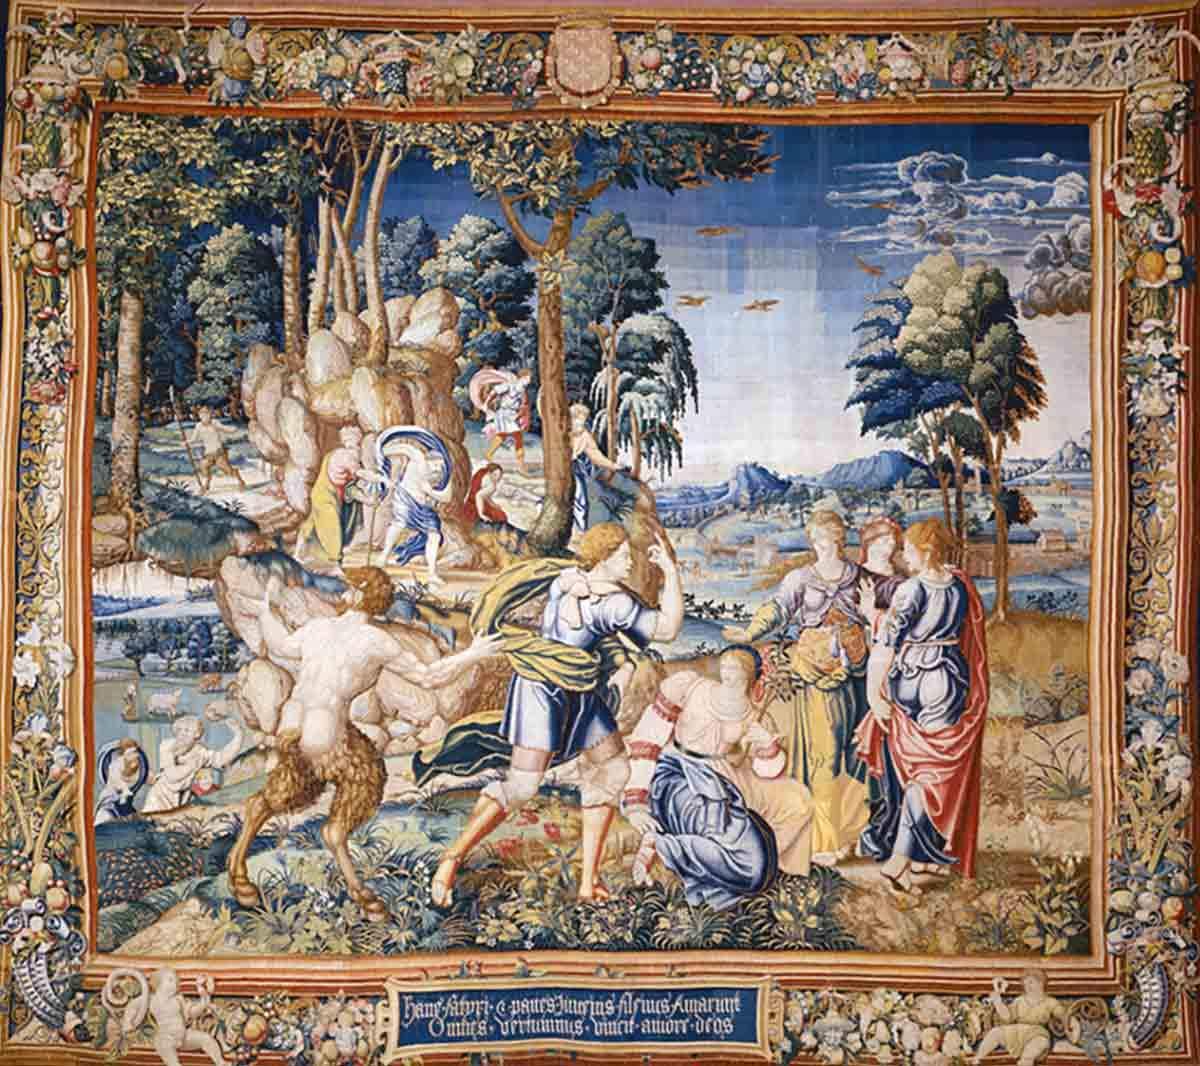 Pomona Surprised by Vertumnus and Other Suitors, from The Story of Vertumnus and Pomona, unknown artist, 1535-40. Source: The Art Institute of Chicago.